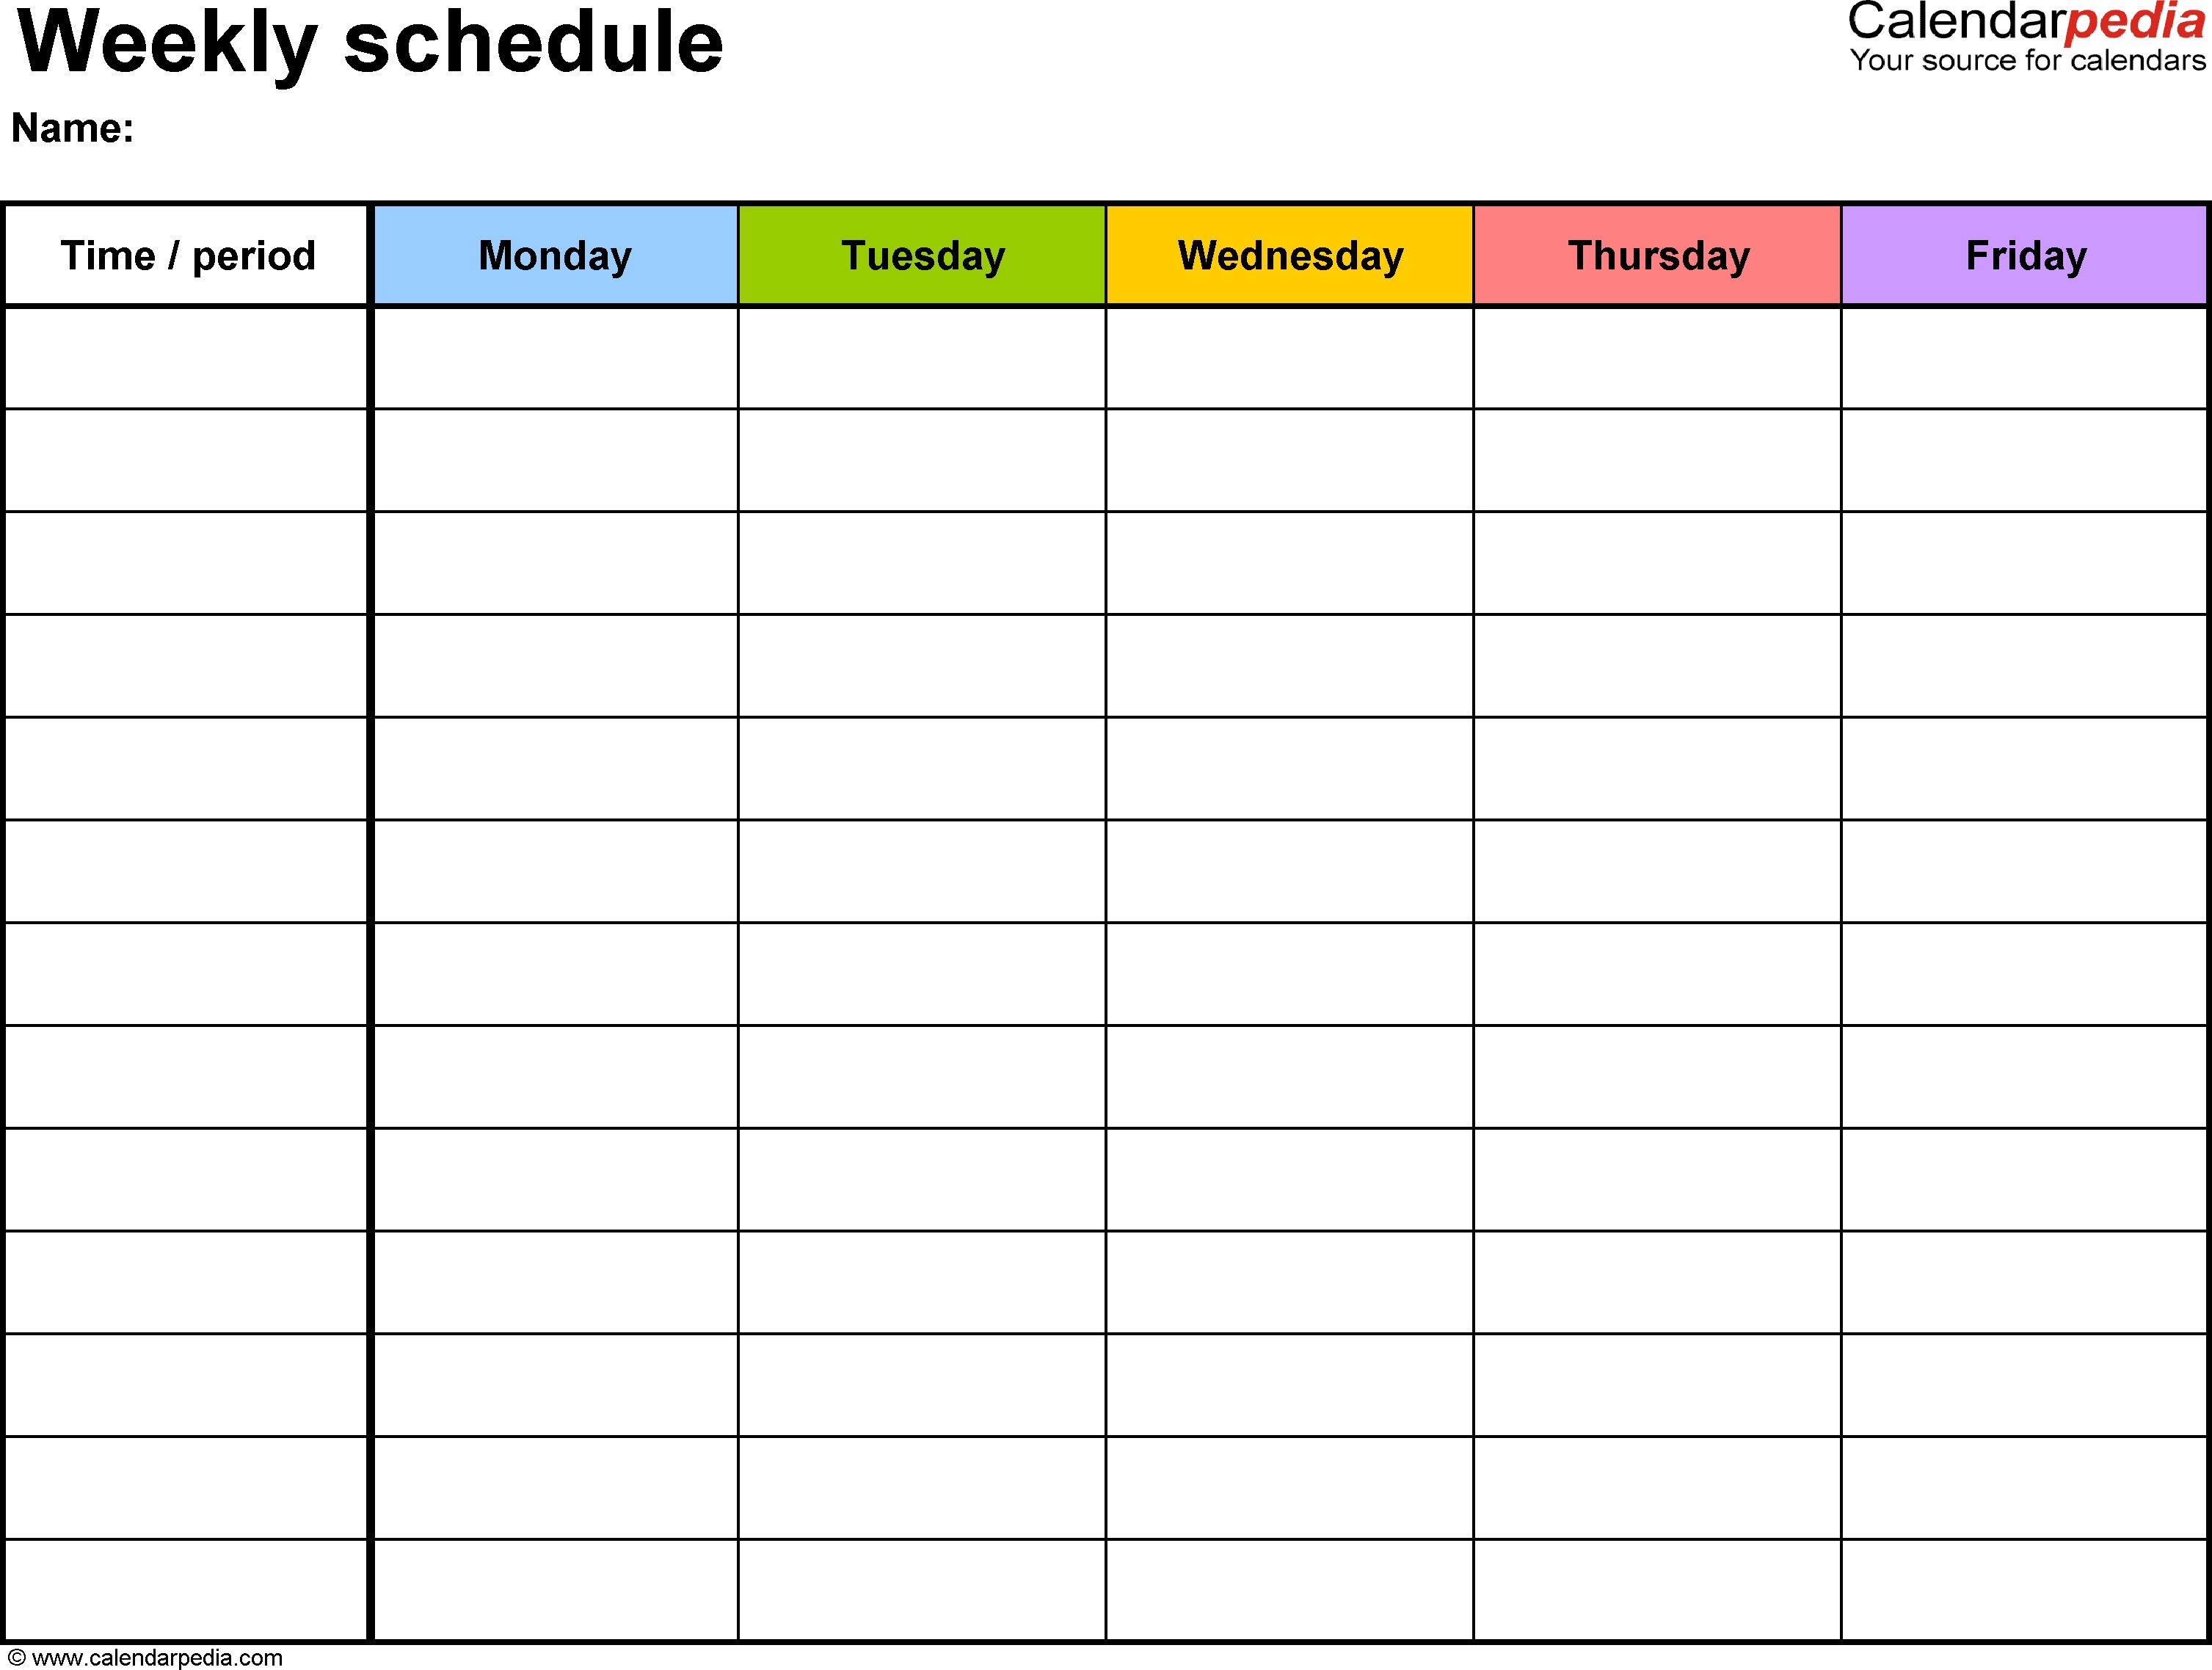 Free Weekly Schedule Templates For Excel - 18 Templates Free Reservation Calendar Template